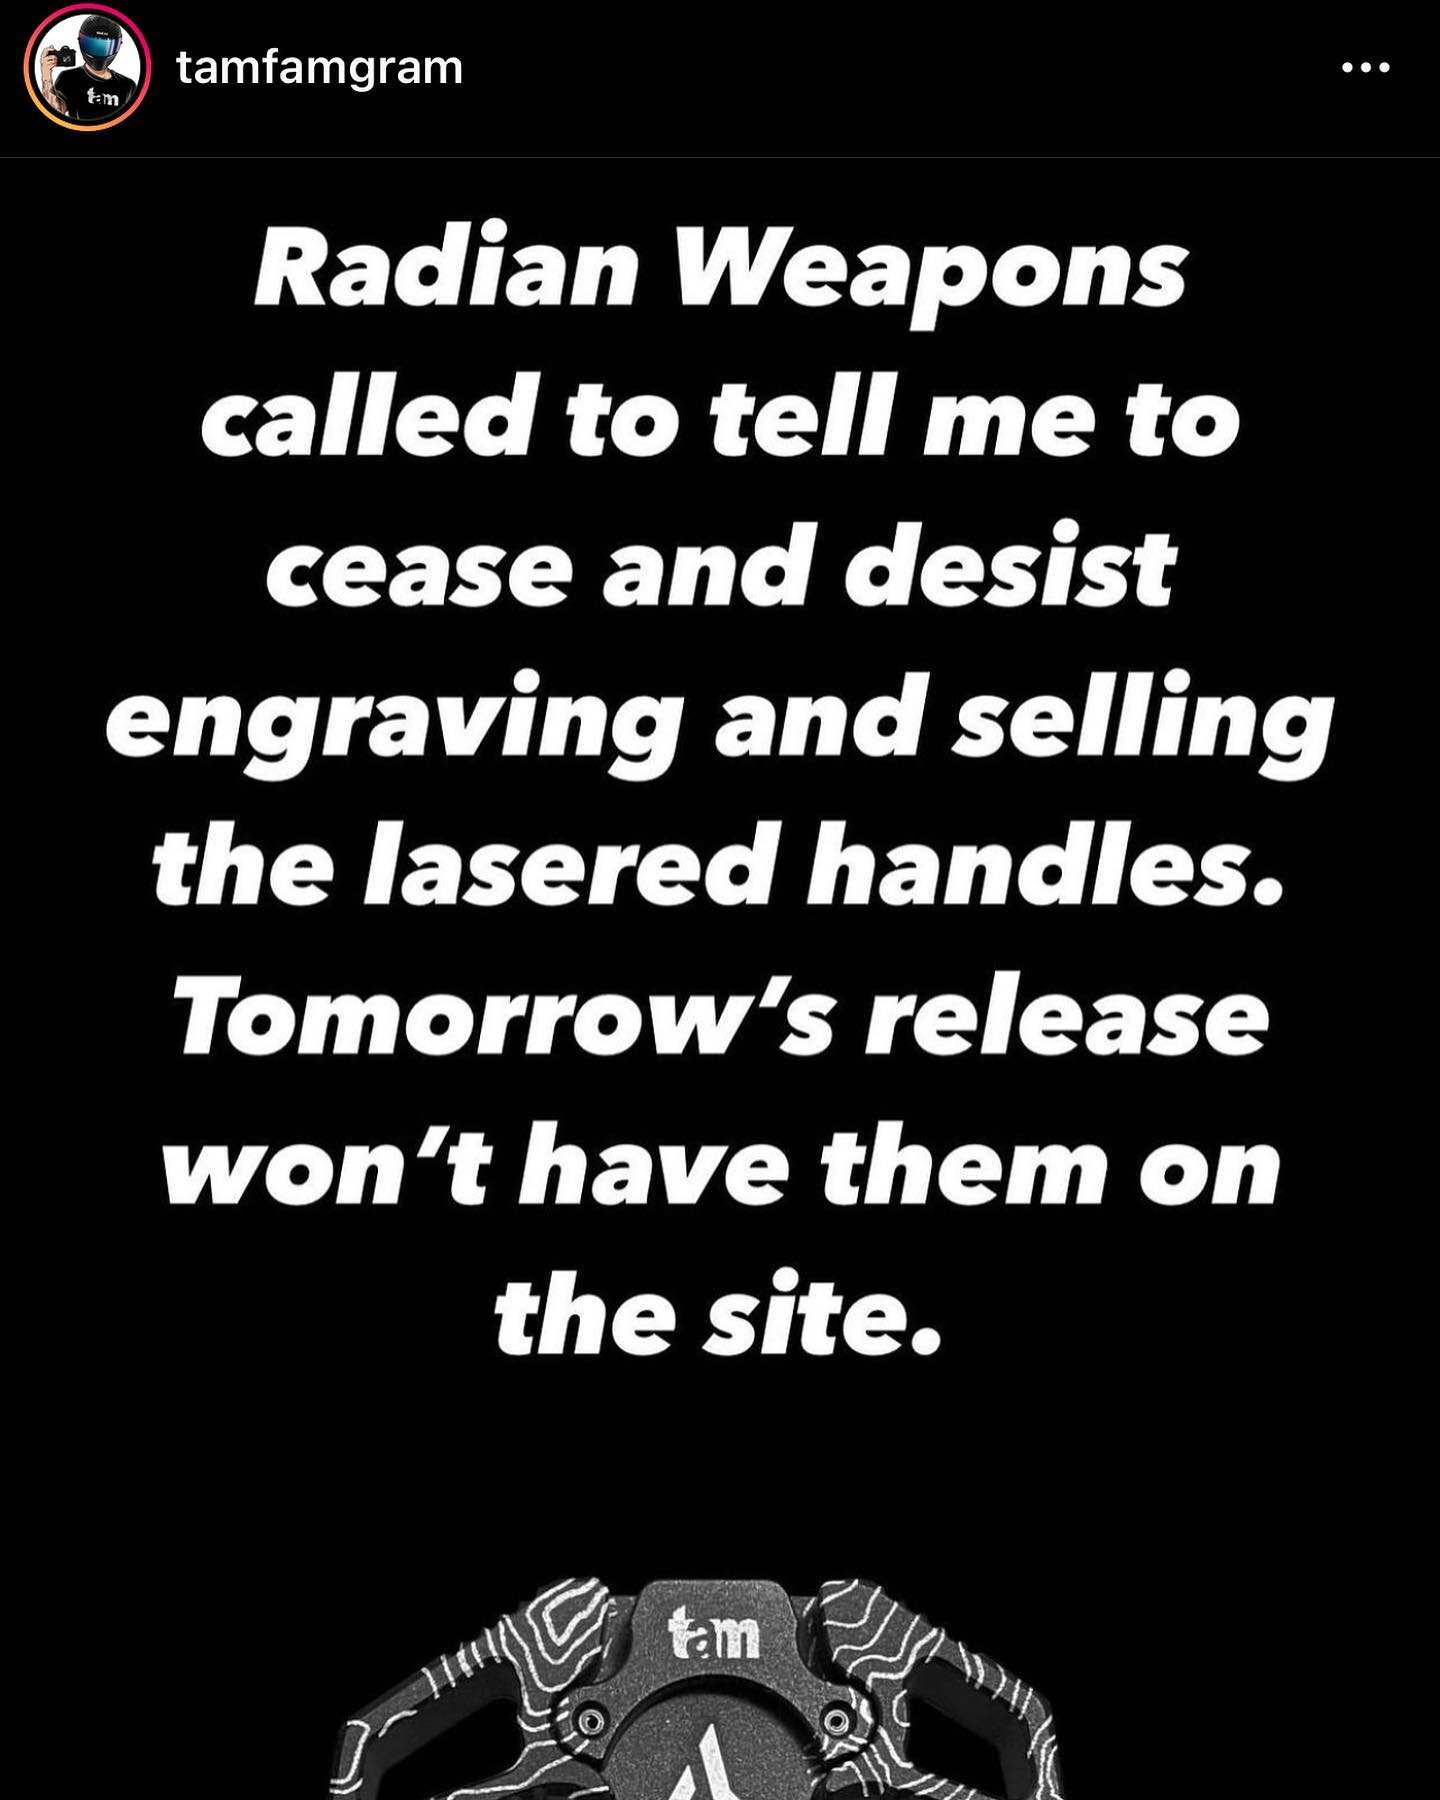 As a customizer I find @radianweapons actions unacceptable @tamfamgram bought those charging handles and should be able to customize them to sell. It&rsquo;s not like he put a drop of blood in it.